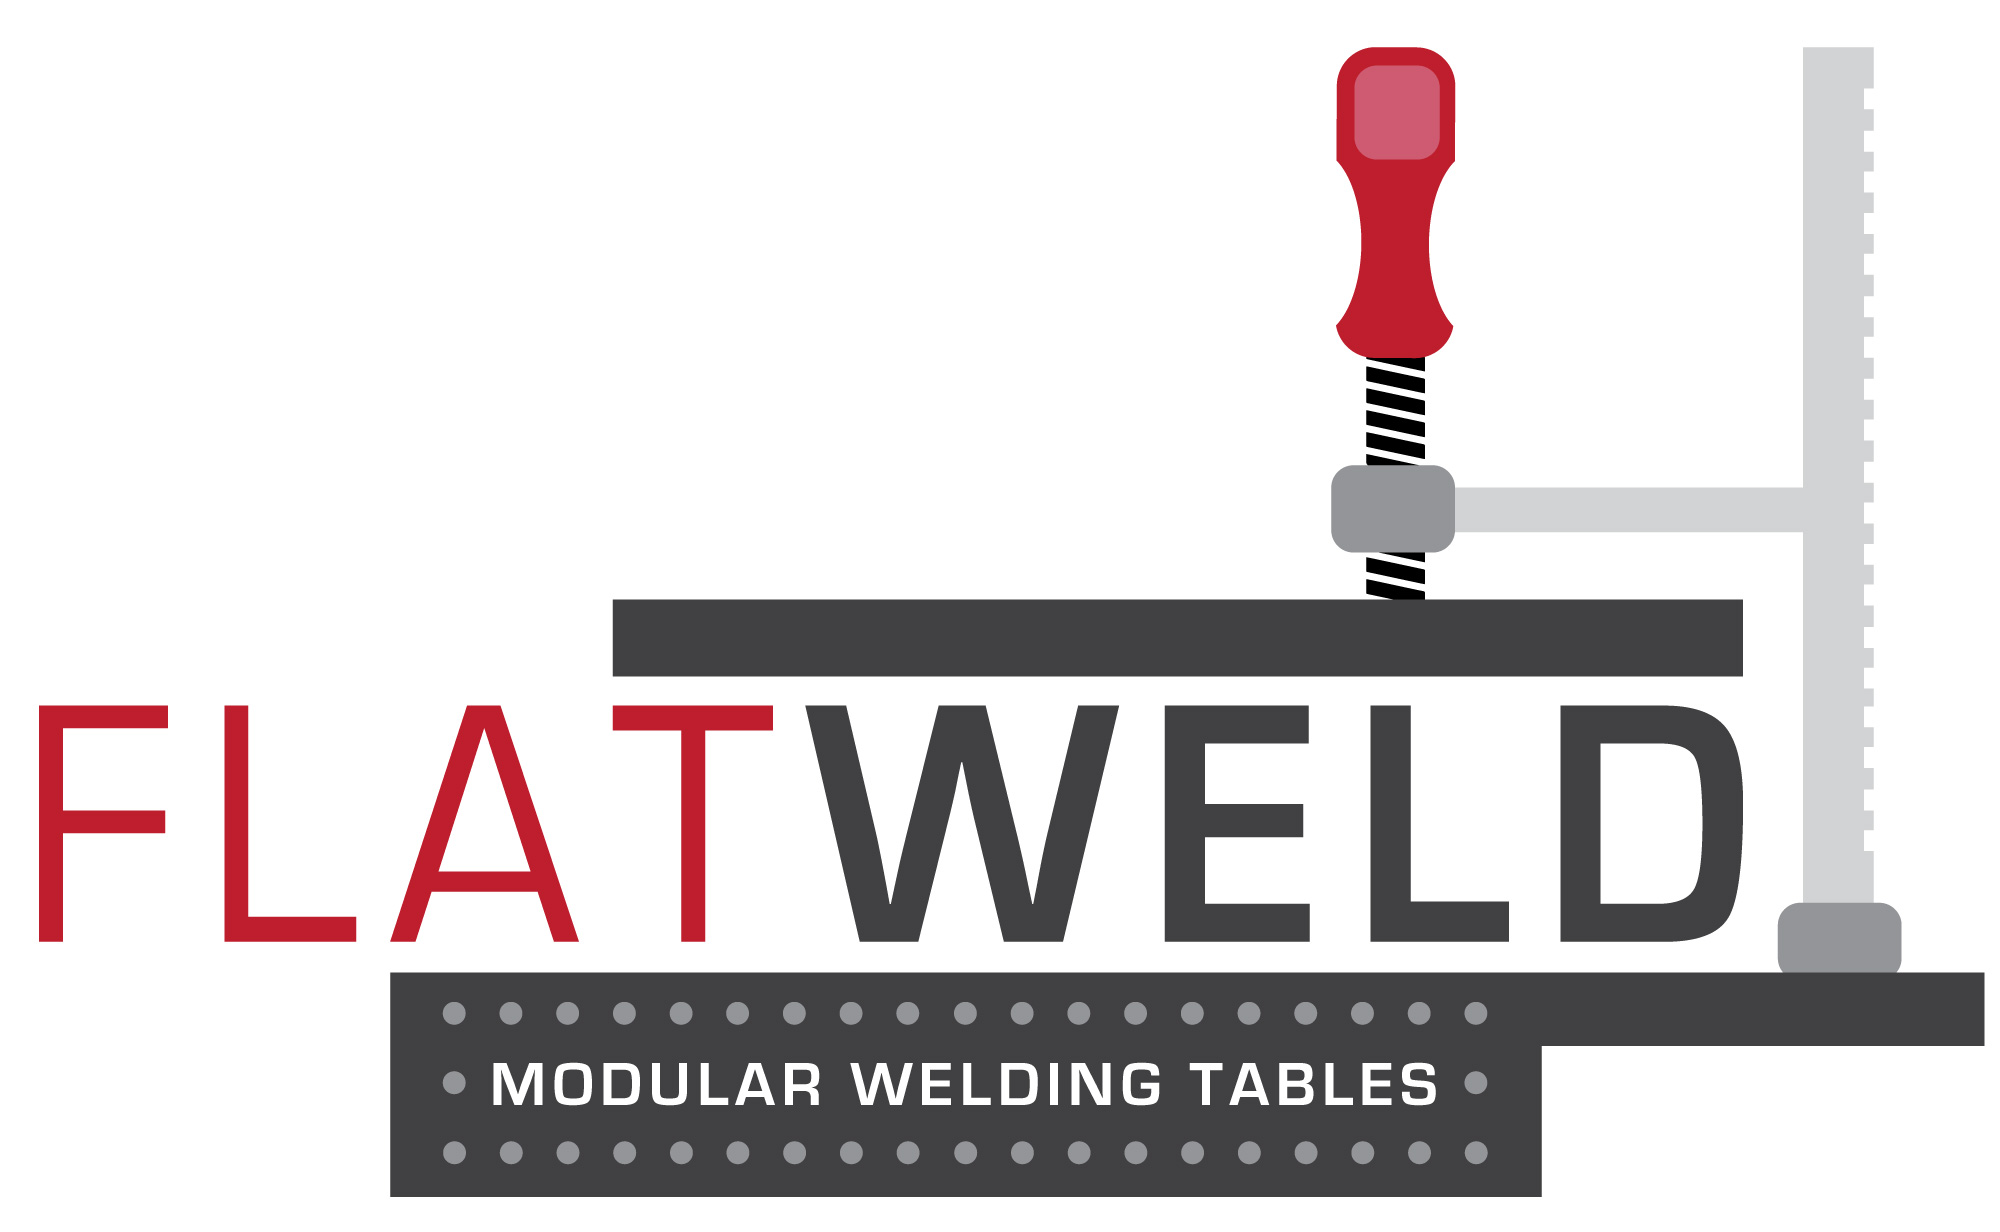 About Flatweld modular welding tables